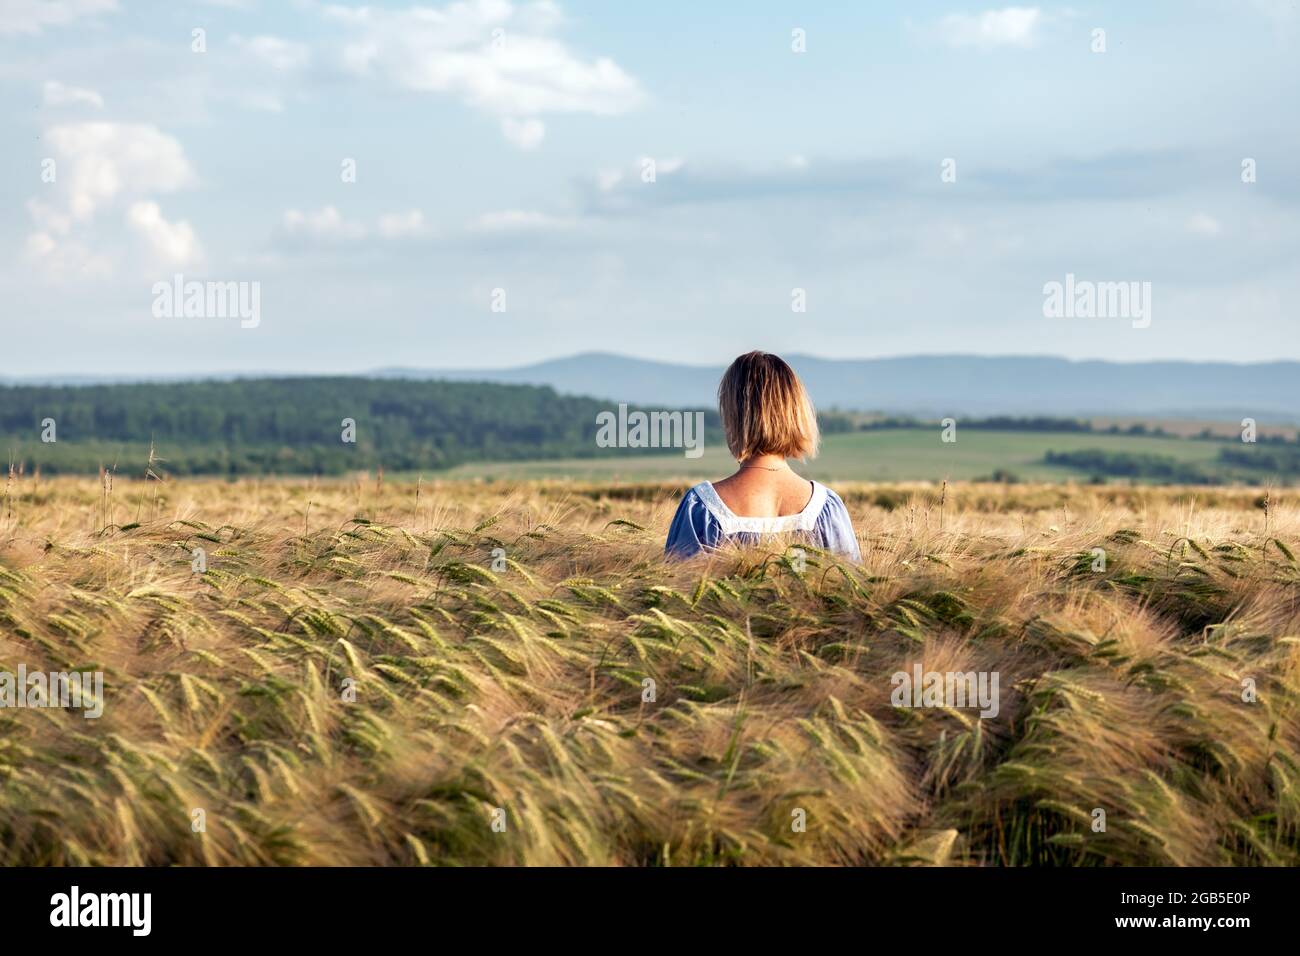 Woman in a wheat field on the background of the blue sky with clouds Stock Photo